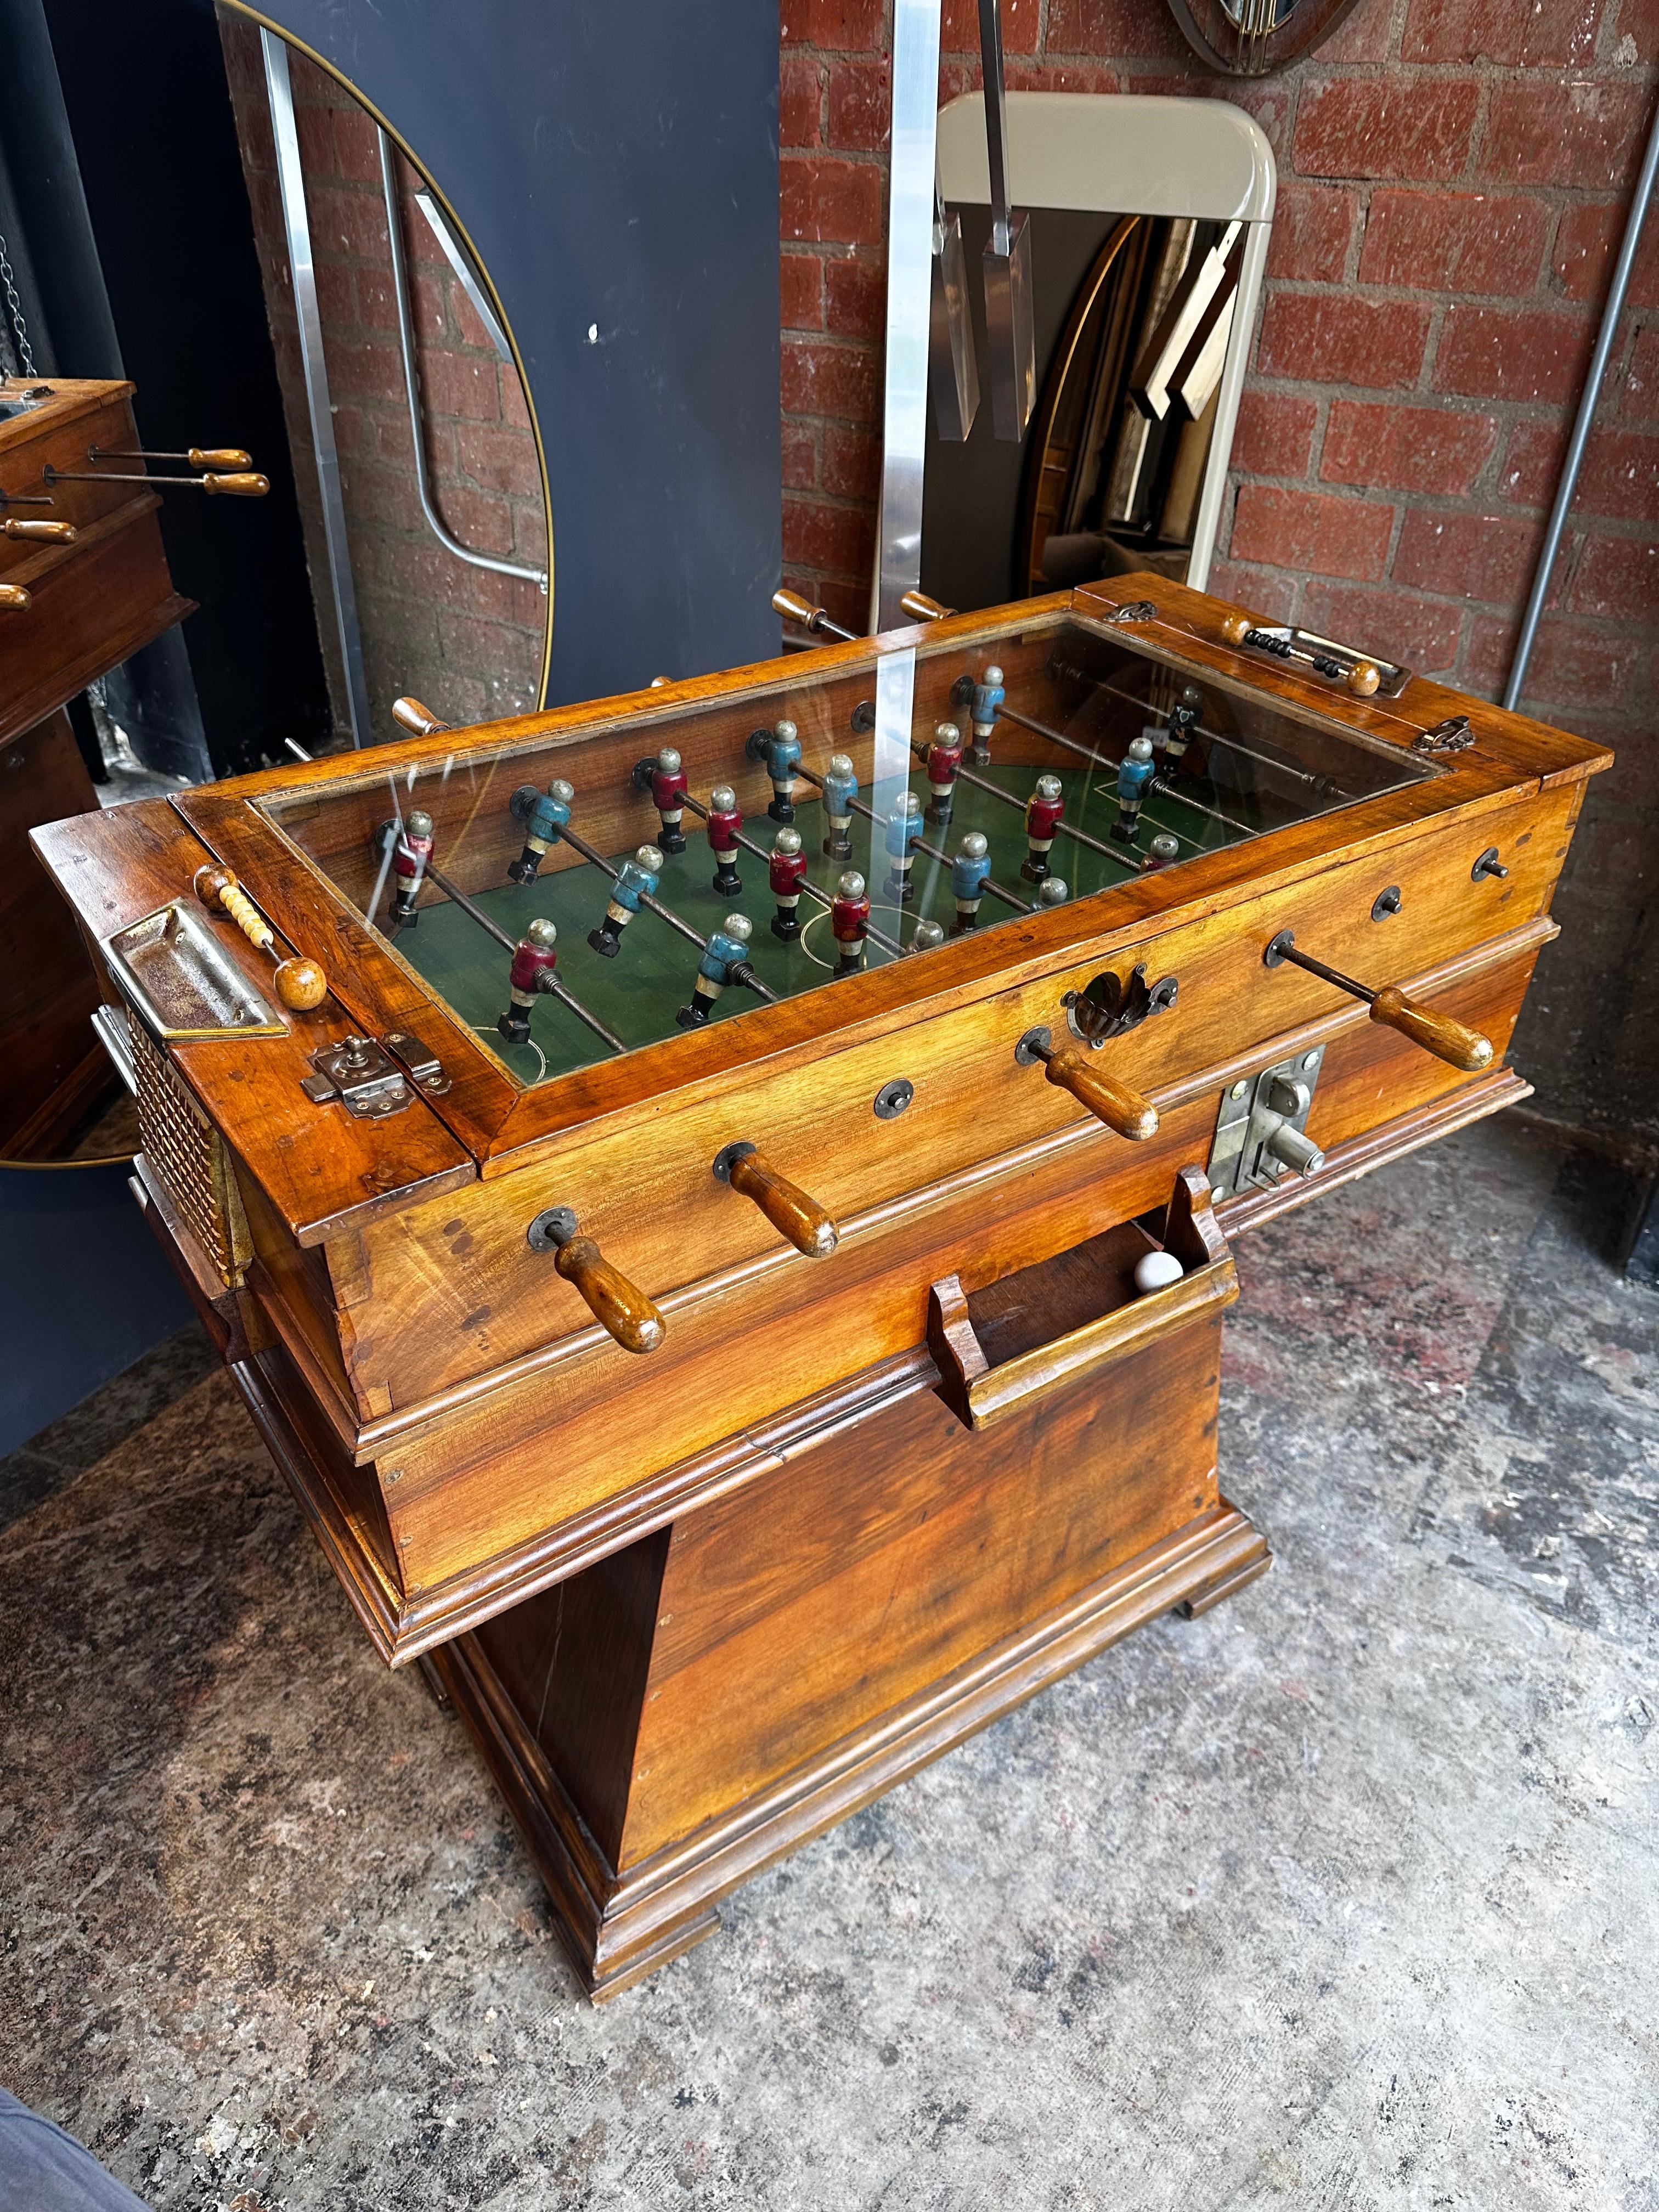 The Art Deco Vintage Italian Foosball Table from the 1940s is a rare and unique piece crafted entirely from wood and metal. This table features distinctive Art Deco design elements, showcasing the style of the 1940s. Its standout feature is a